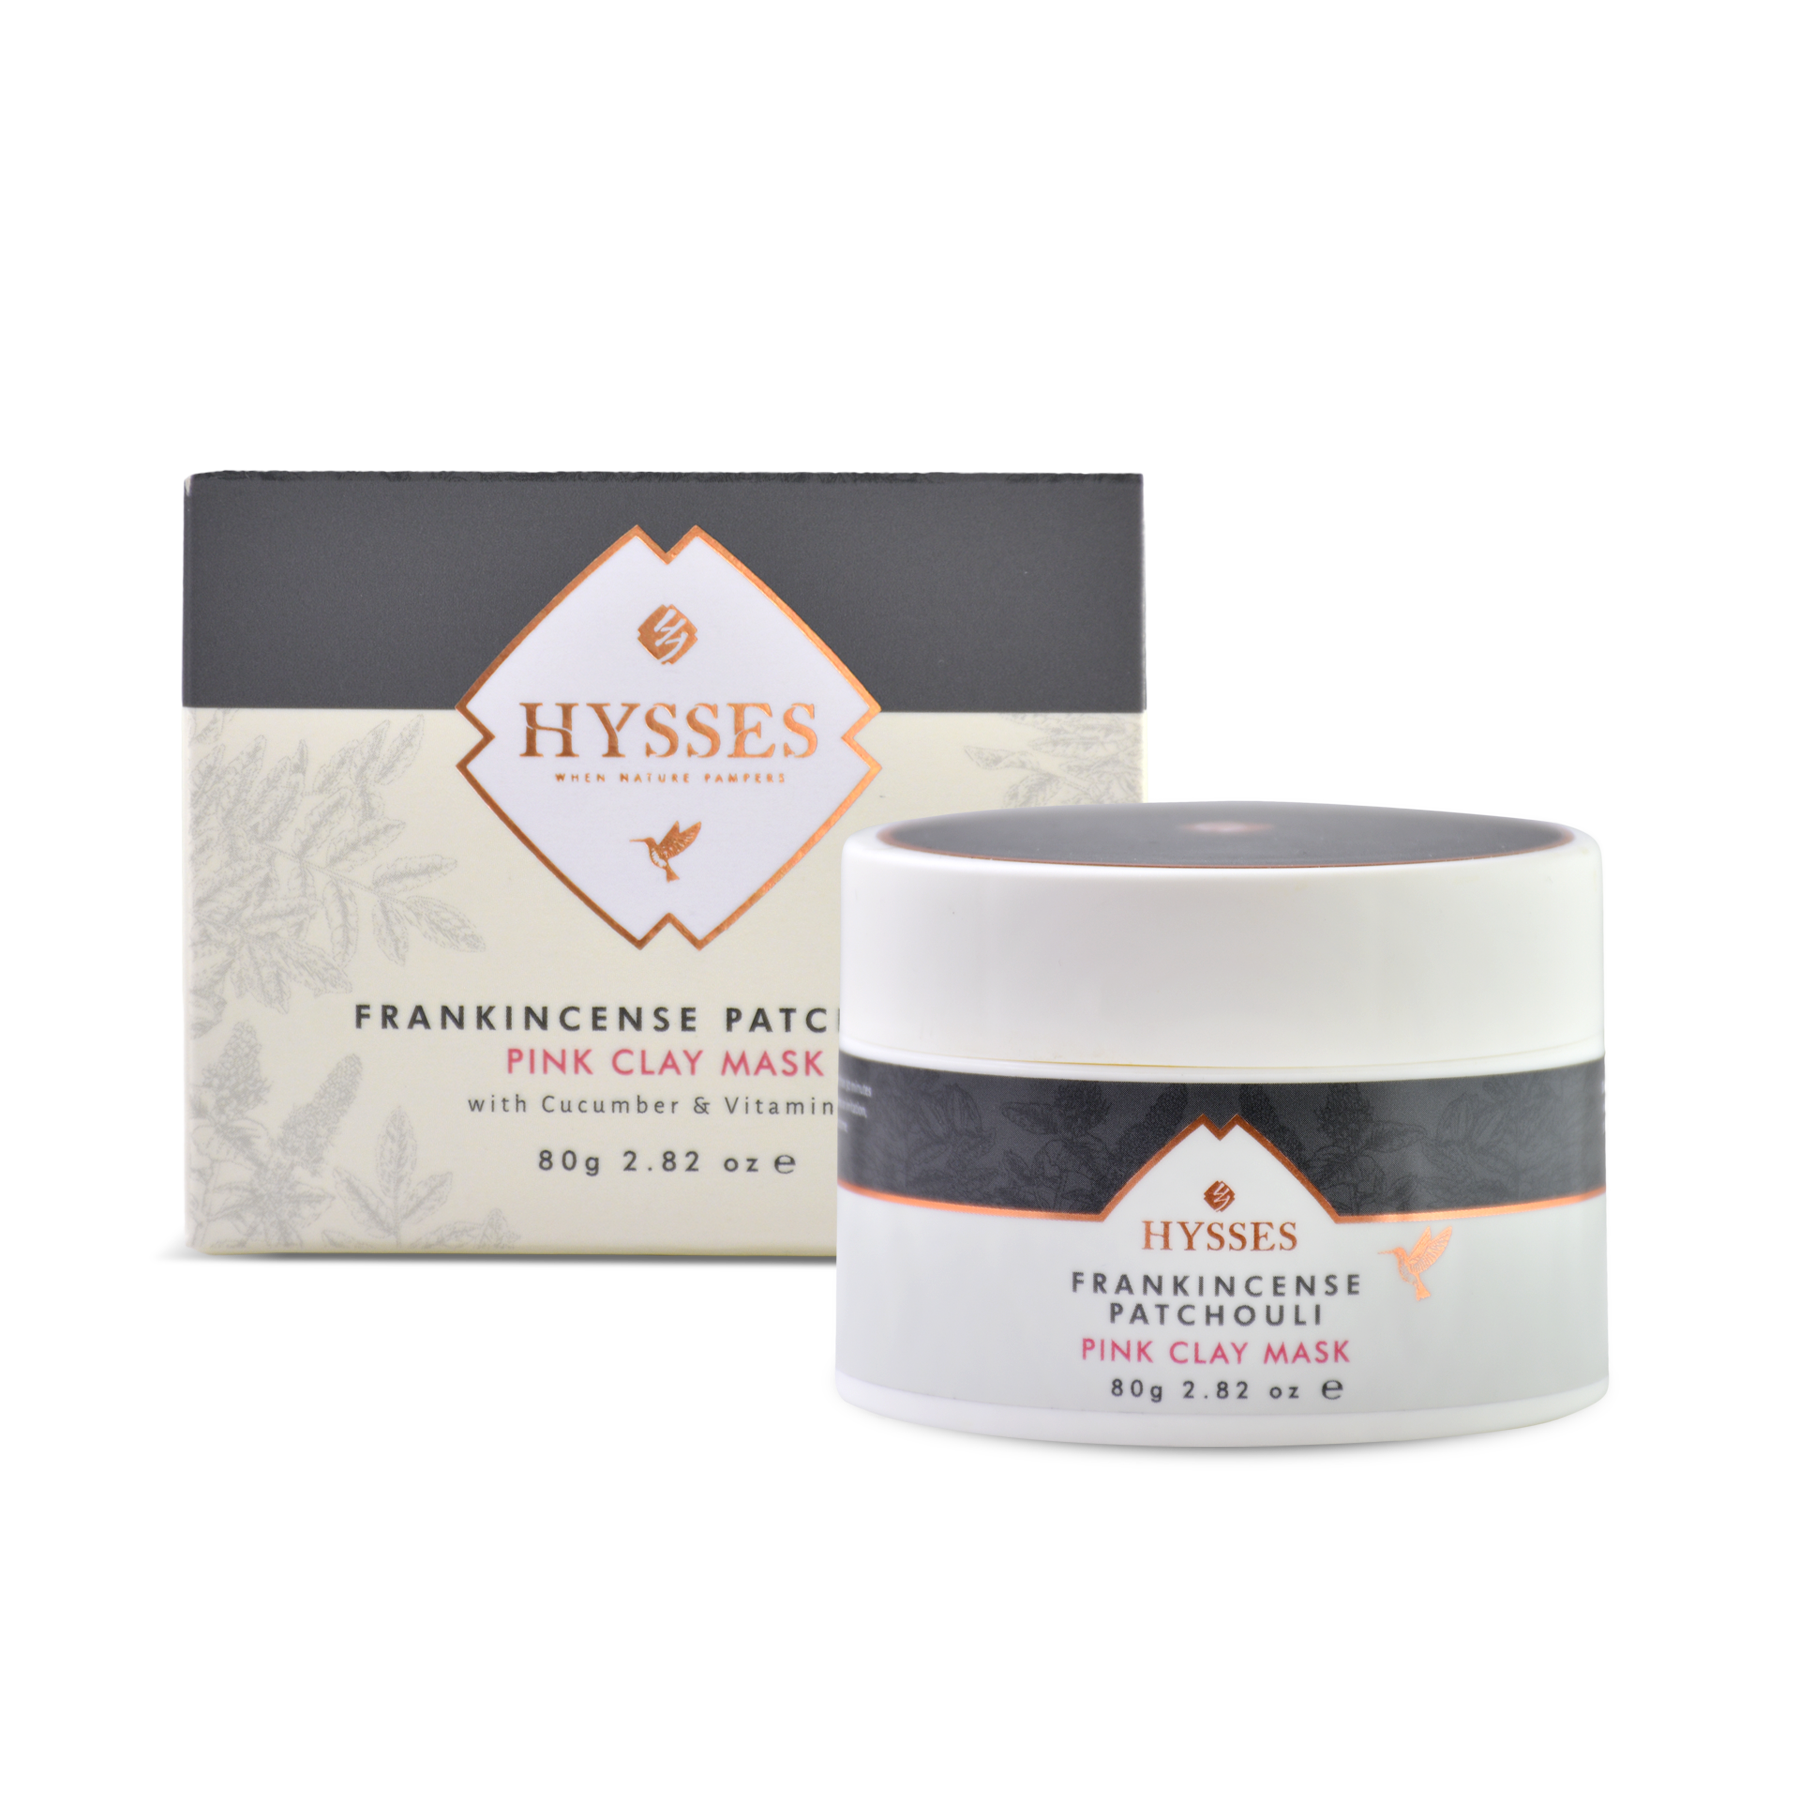 Frankincense Patchouli Pink Clay Mask - HYSSES